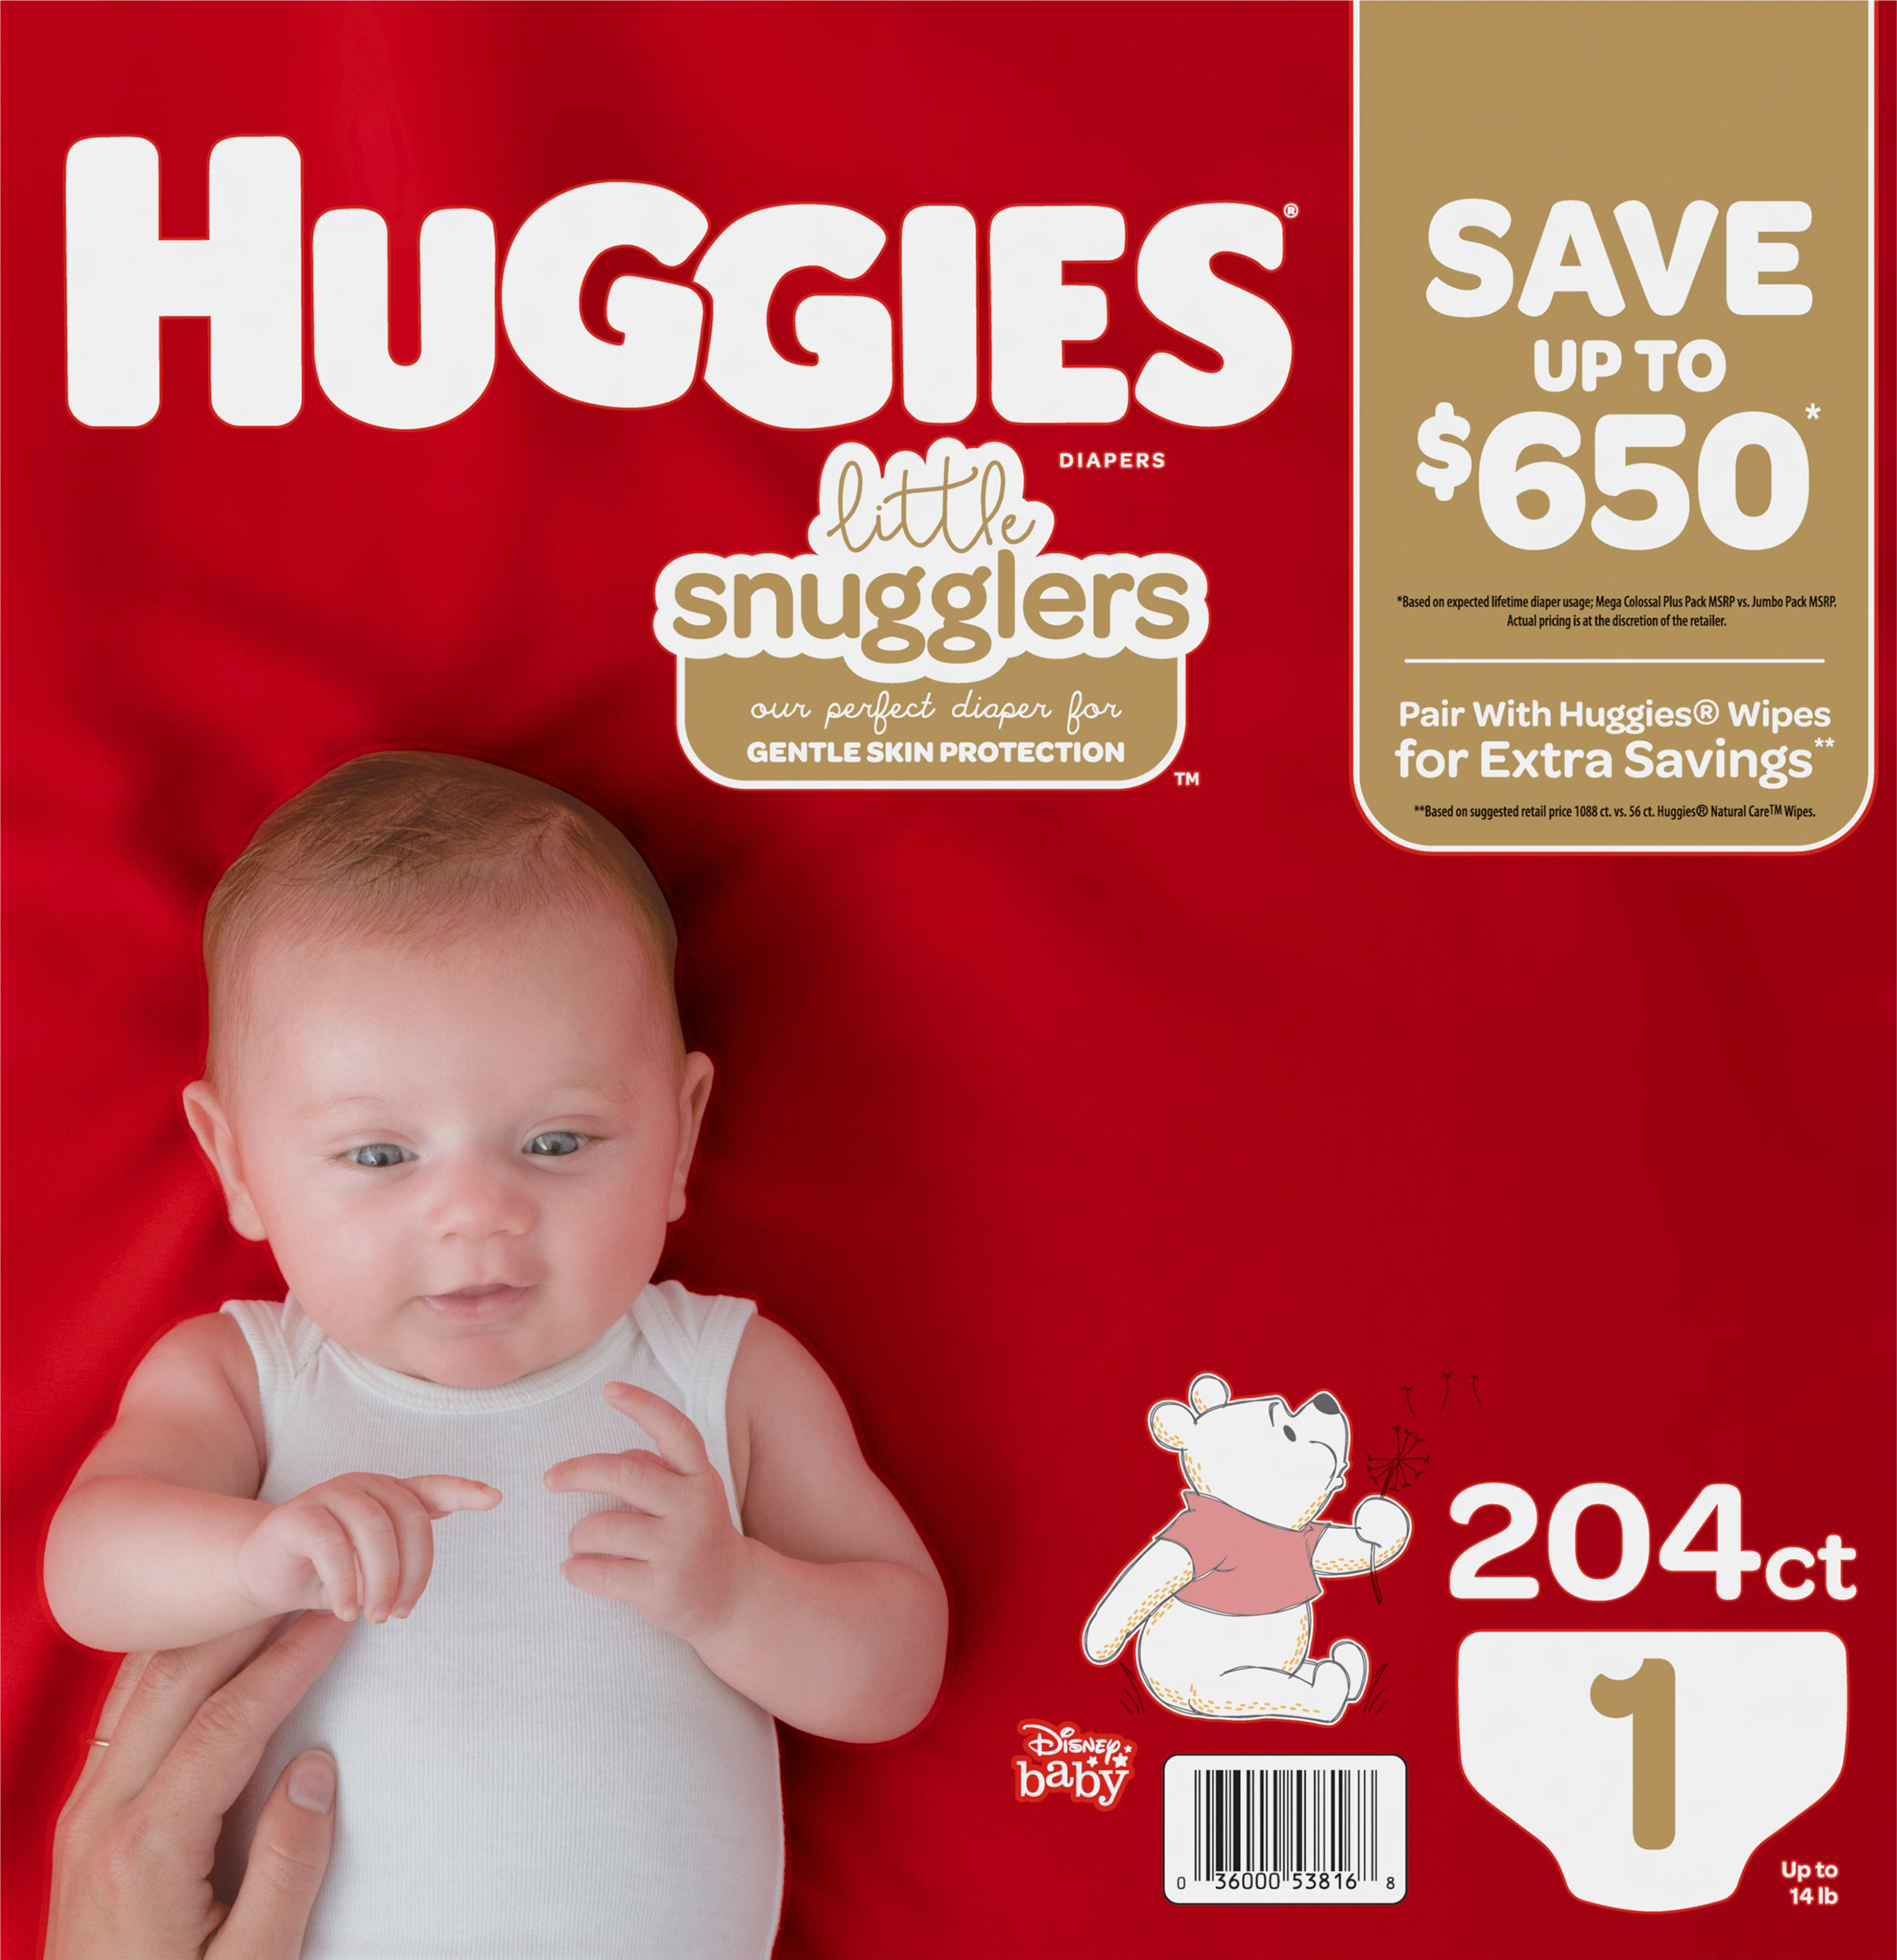 Huggies Little Snugglers Diapers Size 1 - 204 ct. (Up to 14 lbs.) - image 1 of 2